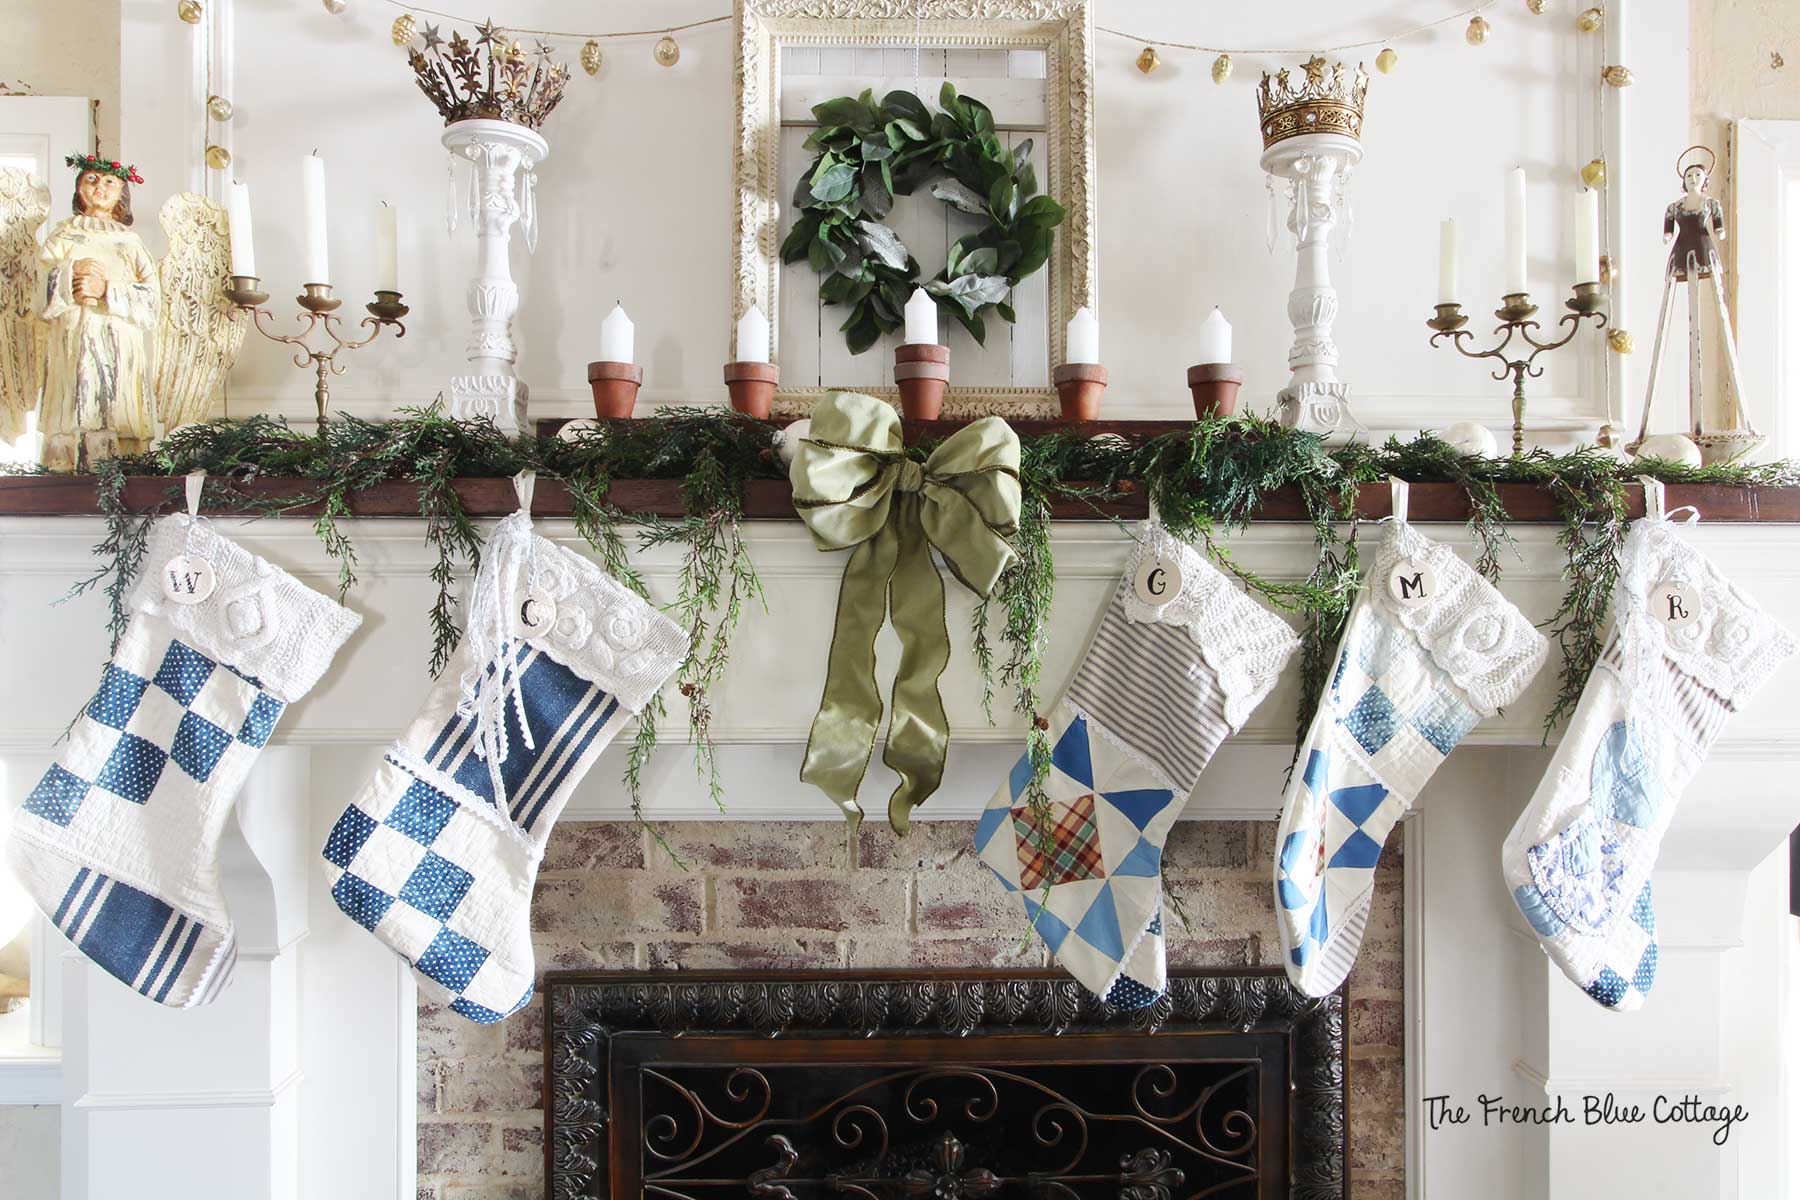 Patchwork stockings on a French country Christmas mantel.